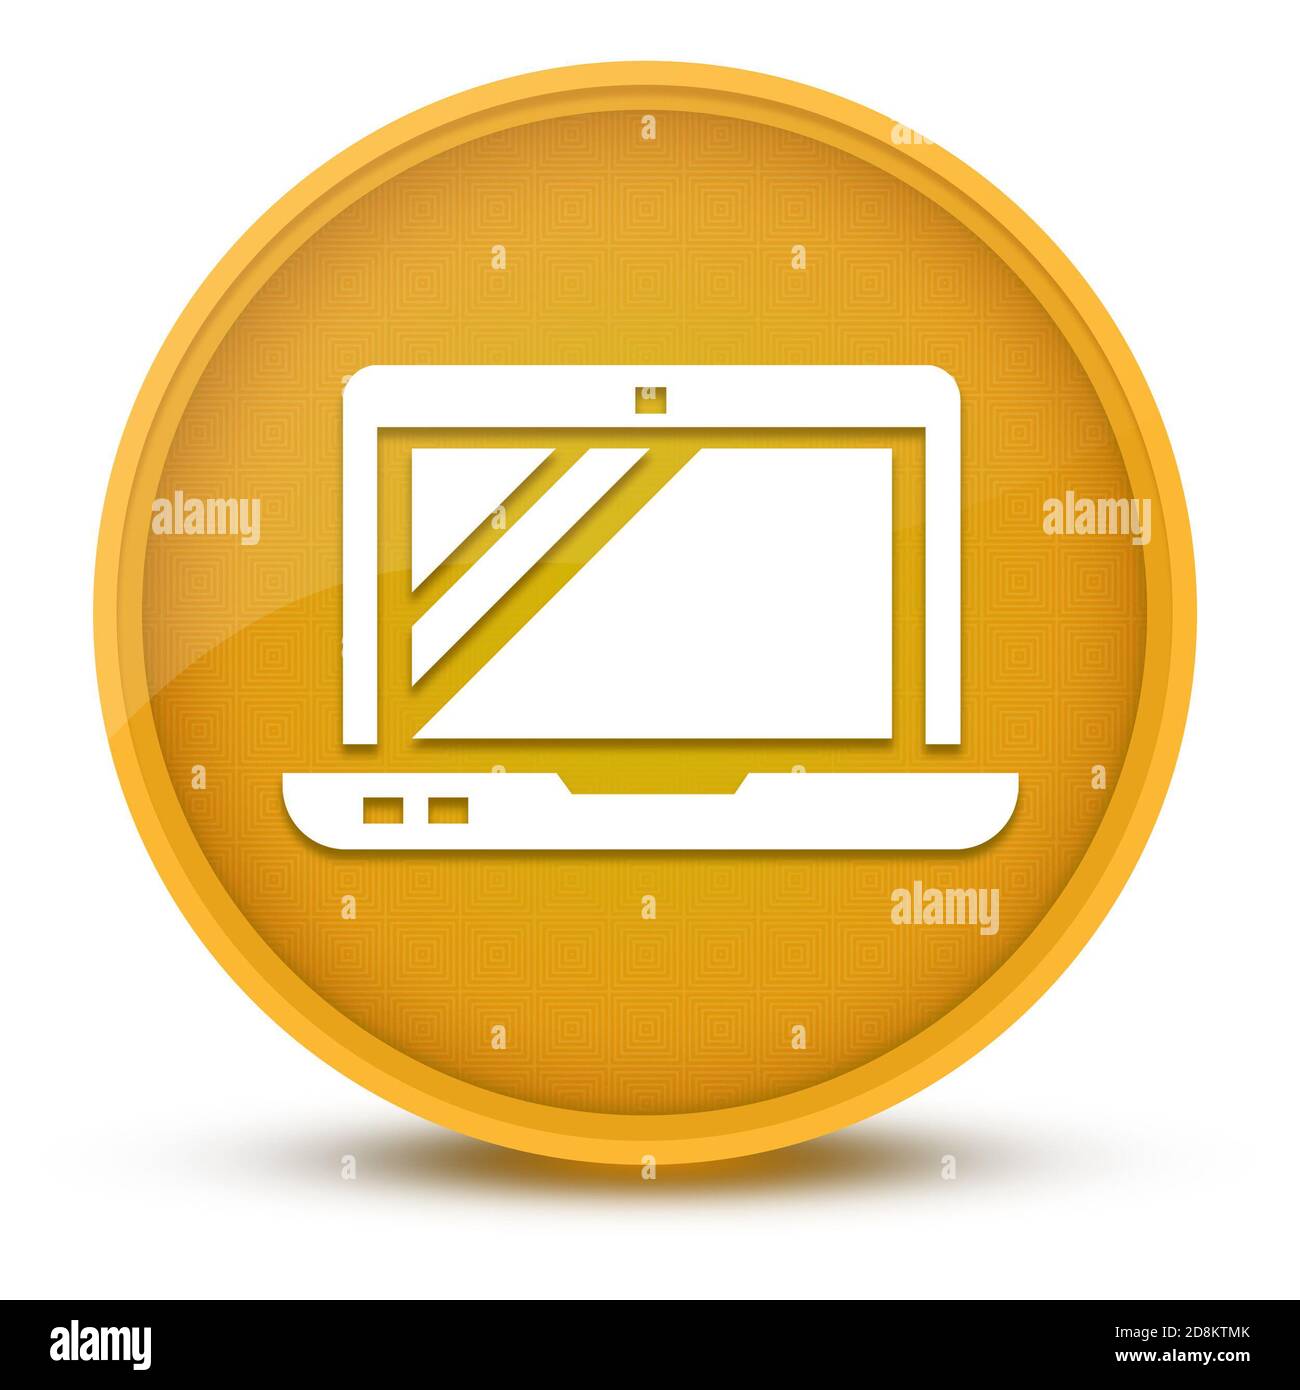 Technical skill luxurious glossy yellow round button abstract illustration Stock Photo